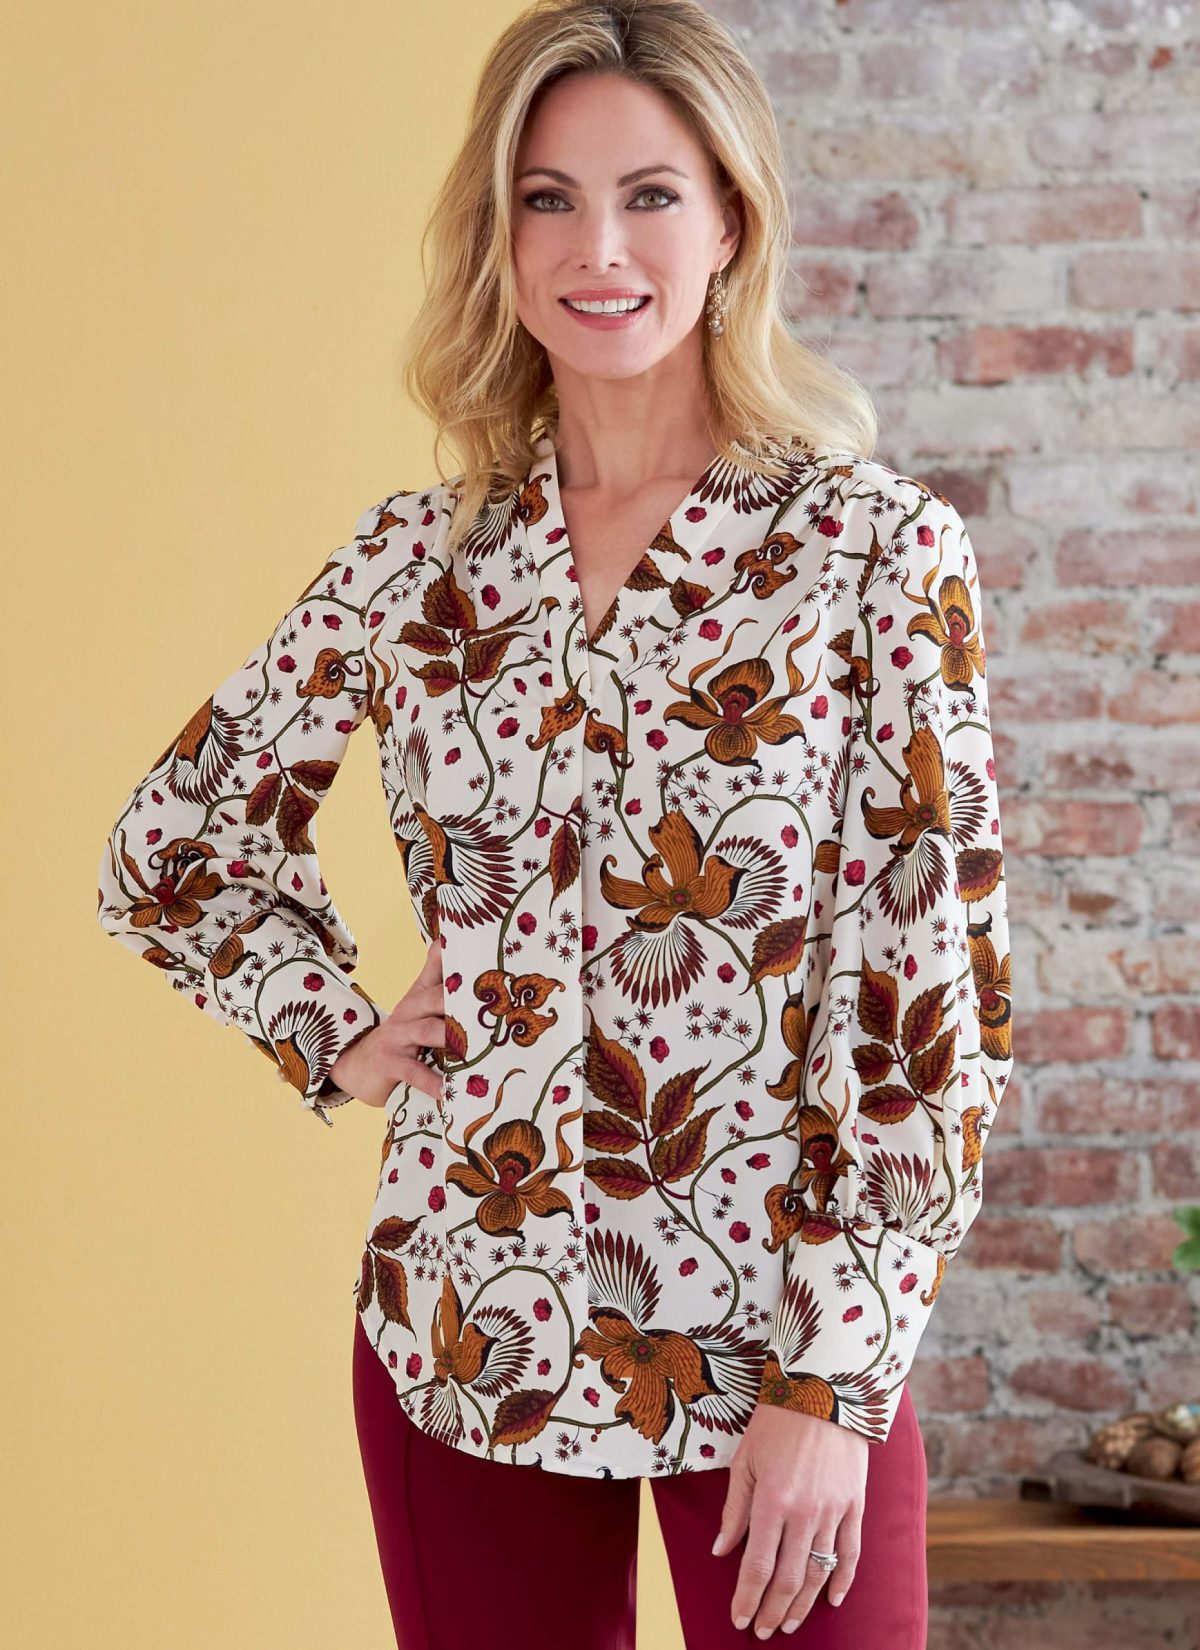 Butterick Sewing Pattern B6855 Misses' Top